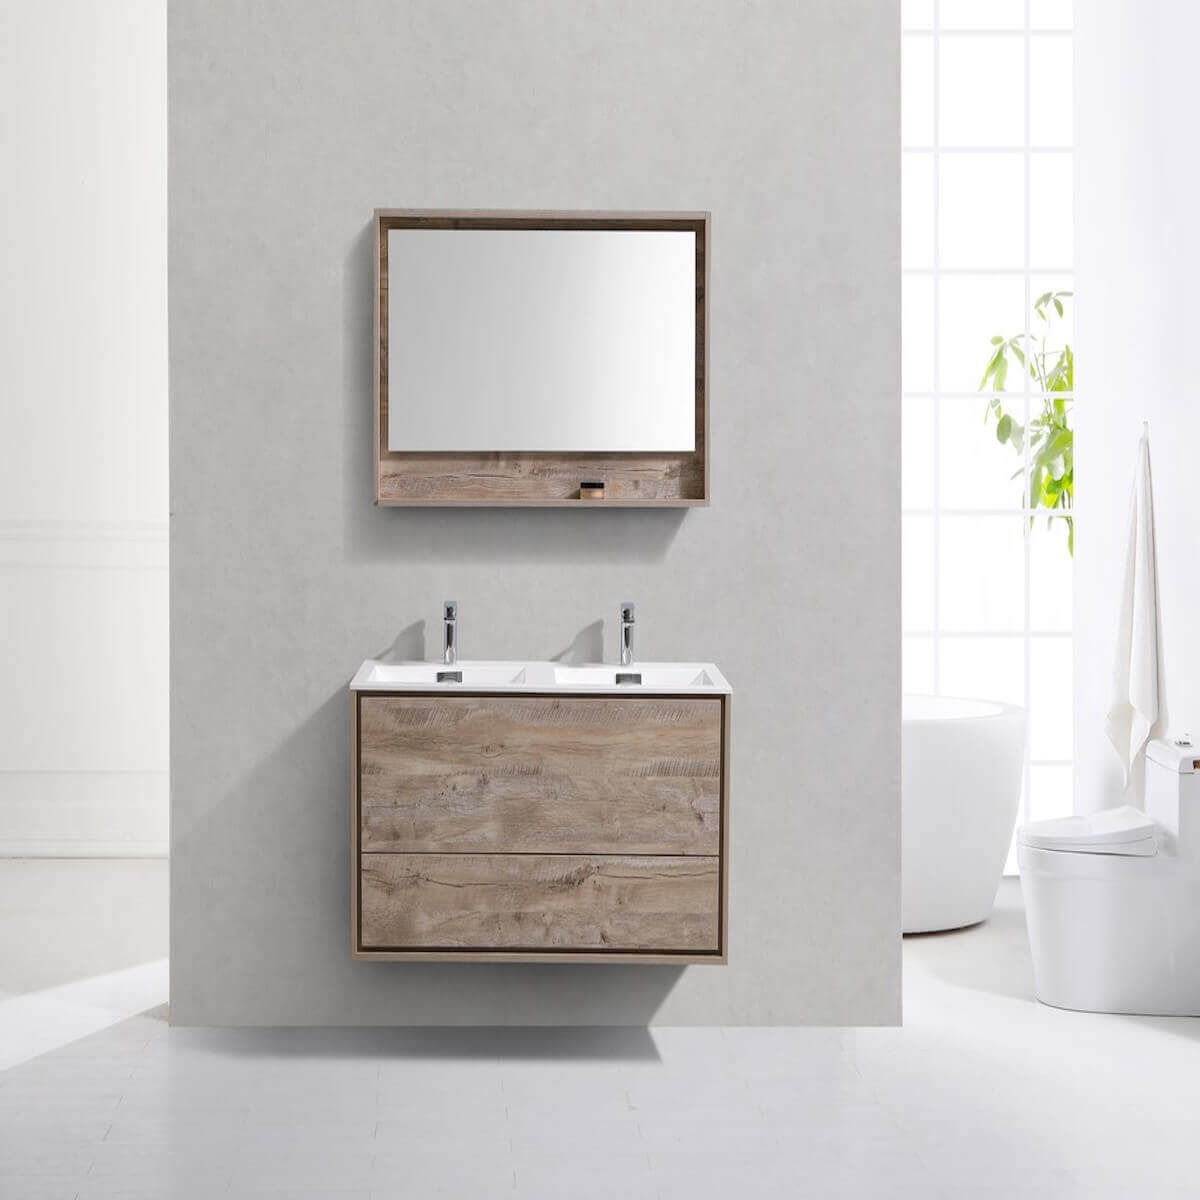 KubeBath DeLusso 48" Nature Wood Wall Mount Double Vanity DL48D-NW in Bathroom #finish_nature wood